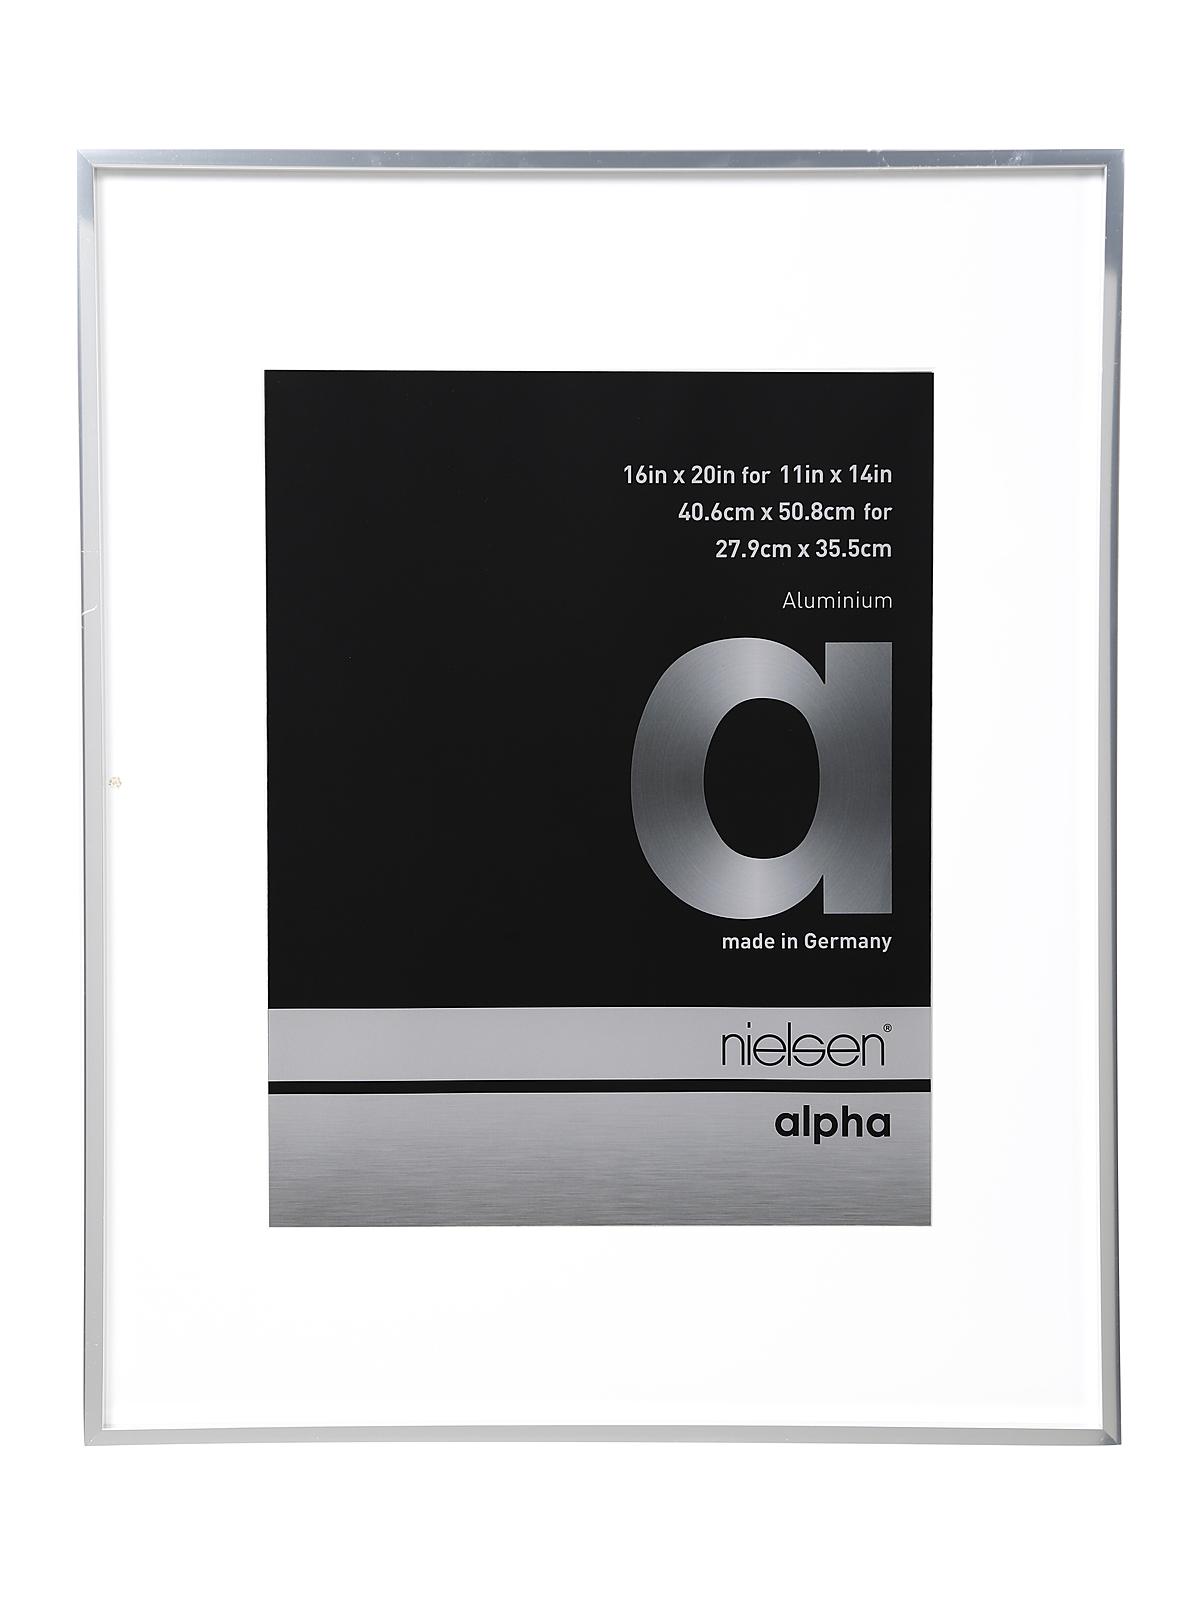 Alpha Aluminum Frames 16 In. X 20 In. Shiny Silver 11 In. X 14 In. Opening